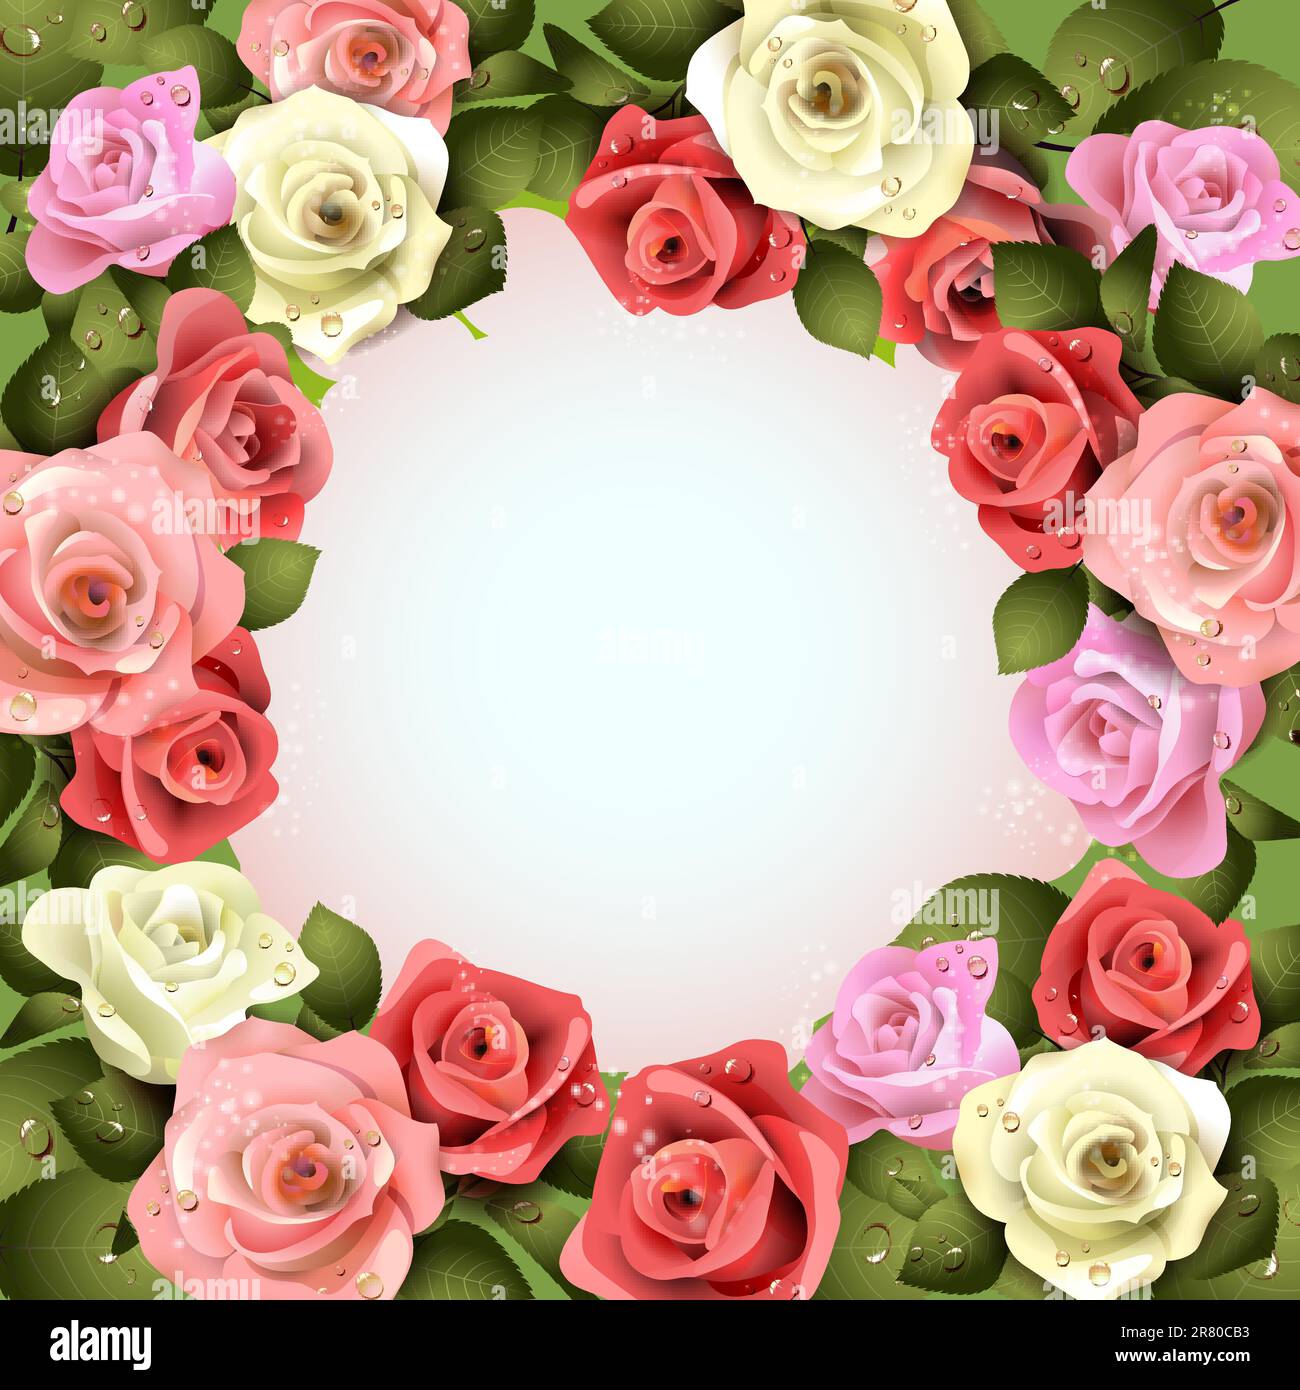 Background with white and pink roses Stock Vector